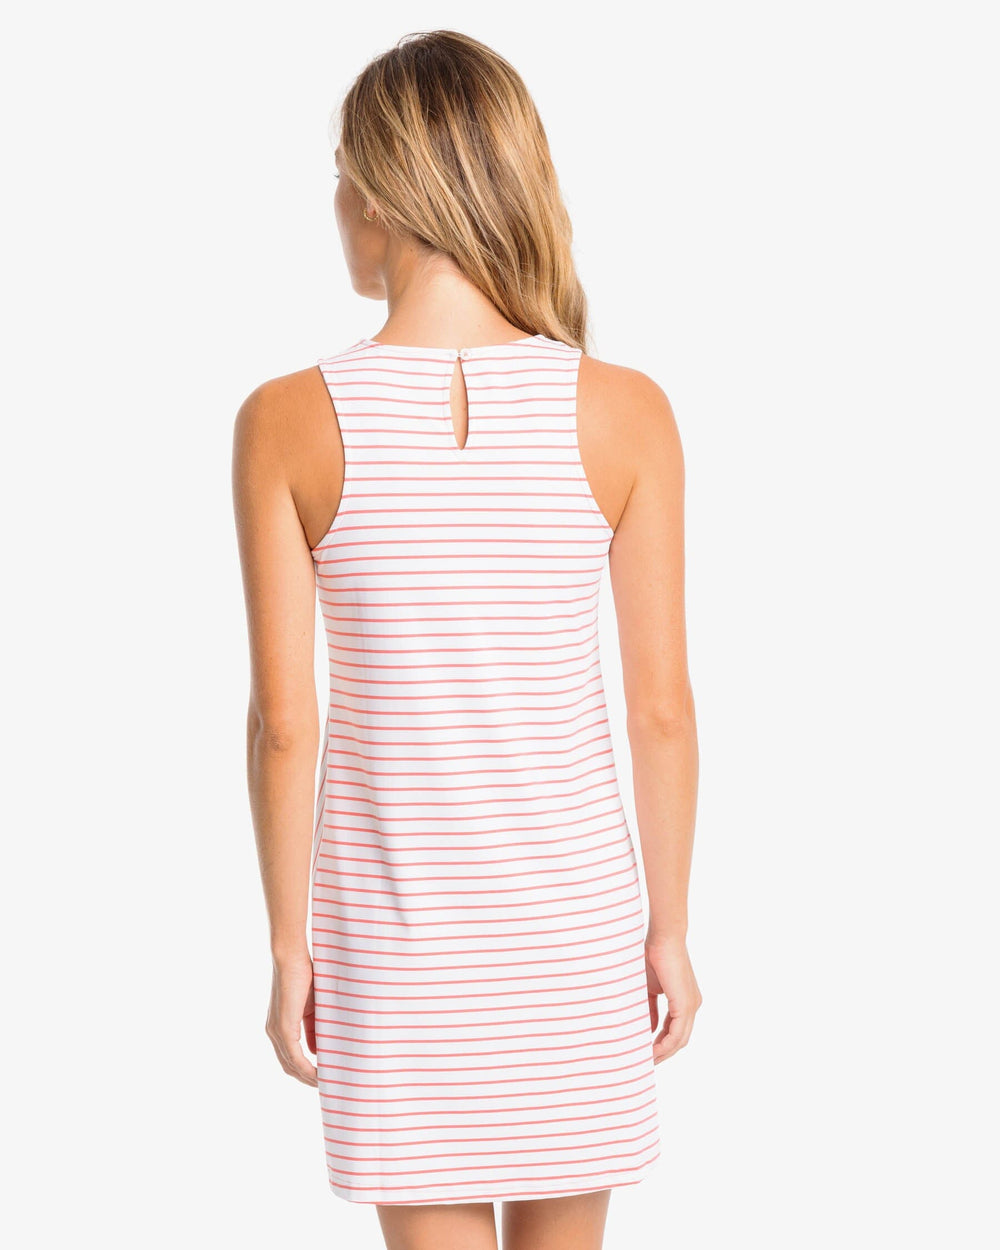 The back view of the Southern Tide Marlee Stripe Performance Dress by Southern Tide - Sunkist Coral